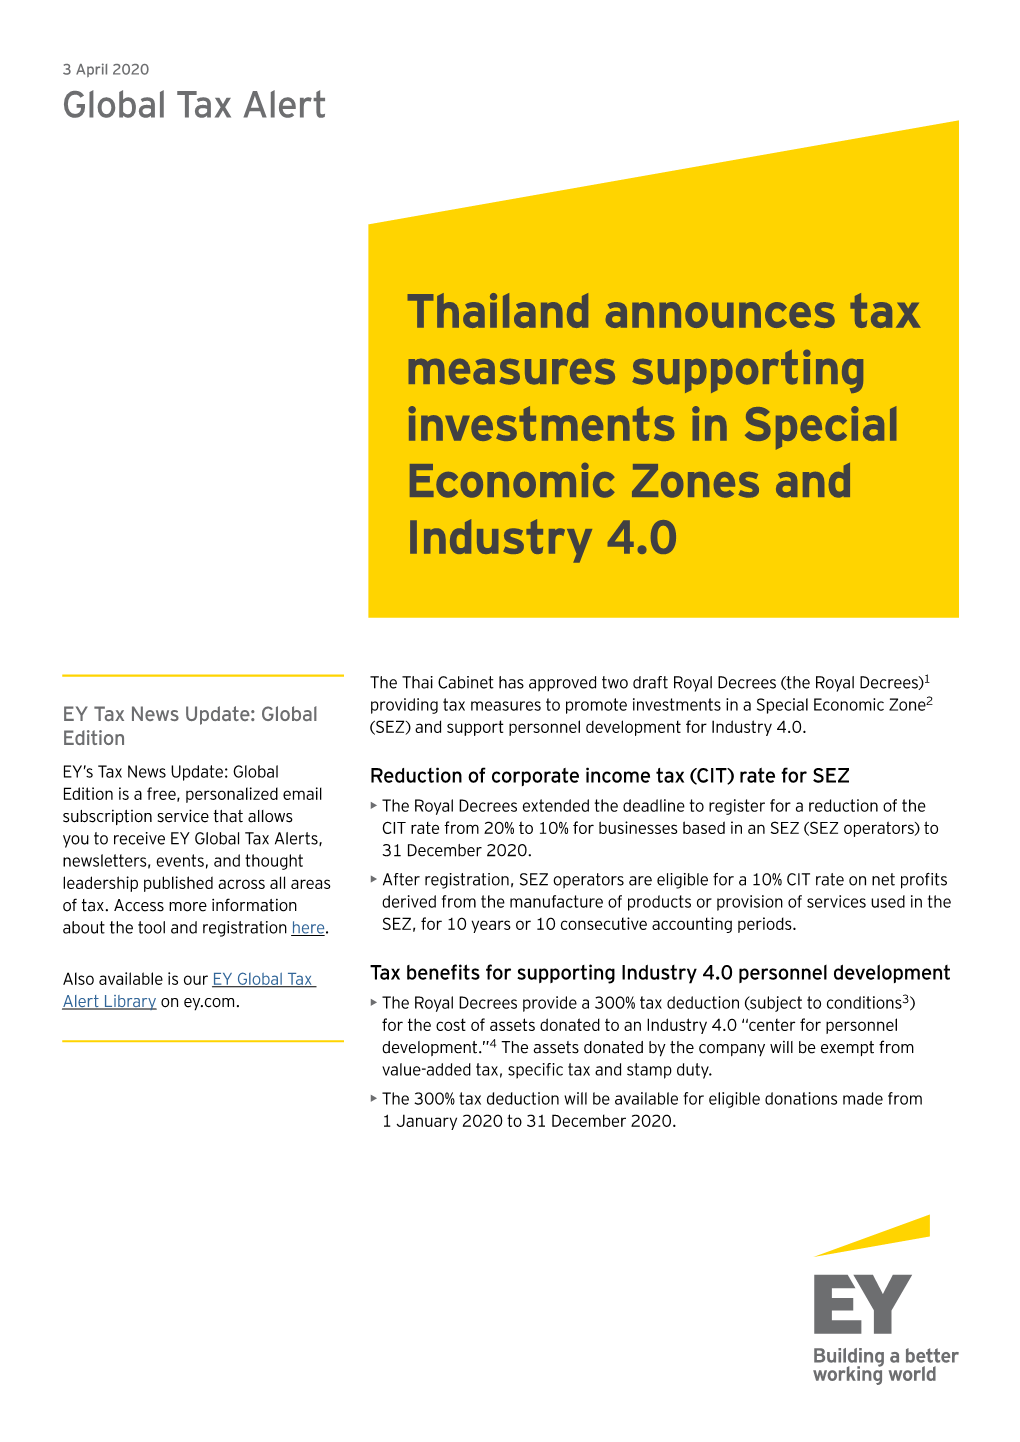 Thailand Announces Tax Measures Supporting Investments in Special Economic Zones and Industry 4.0